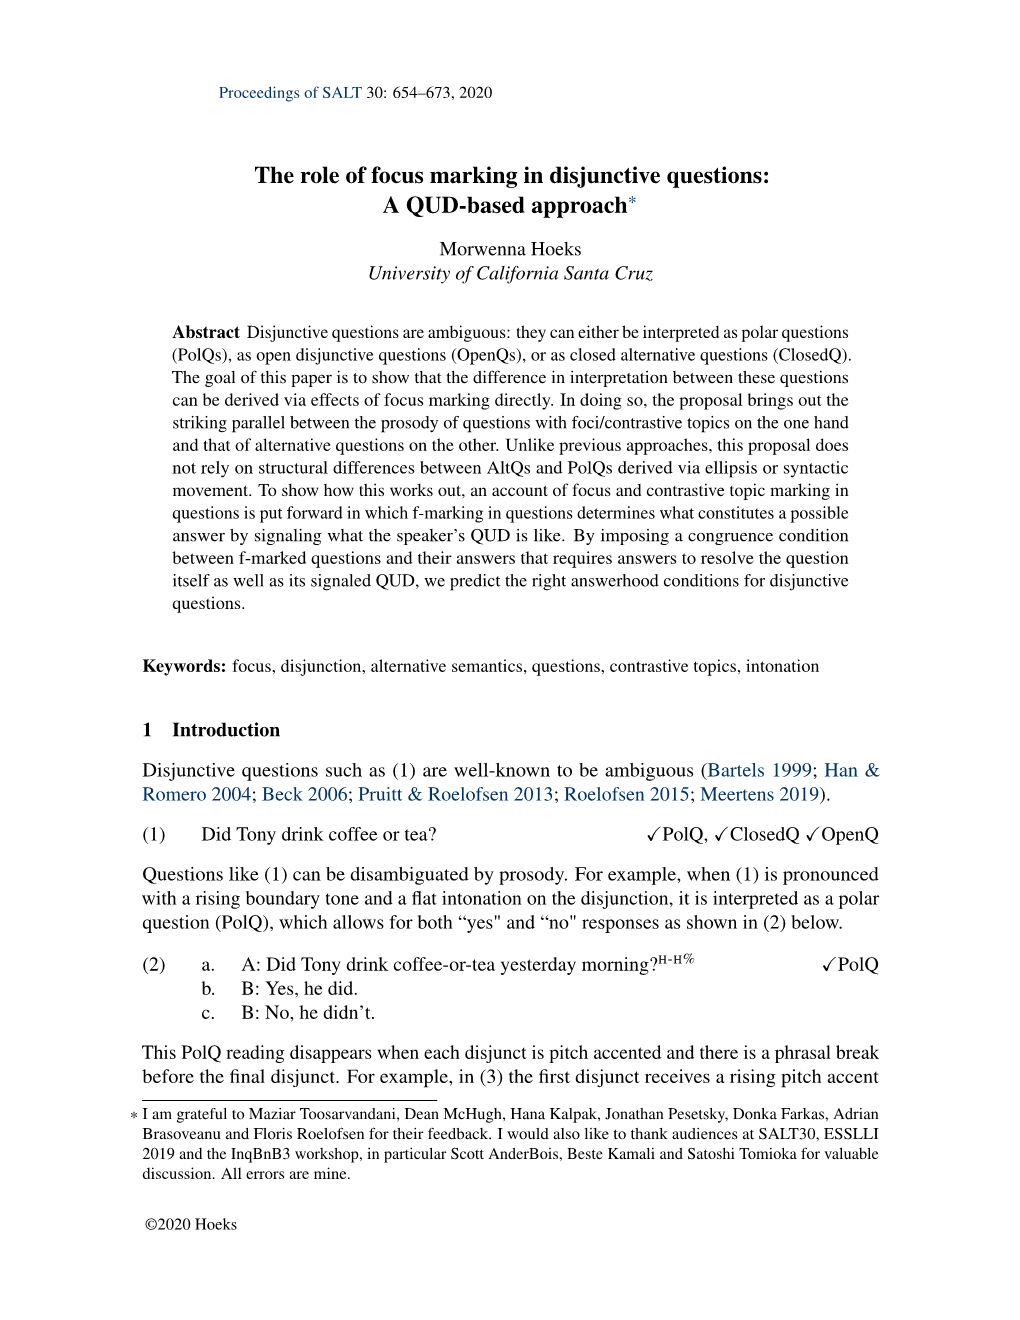 The Role of Focus Marking in Disjunctive Questions: a QUD-Based Approach*